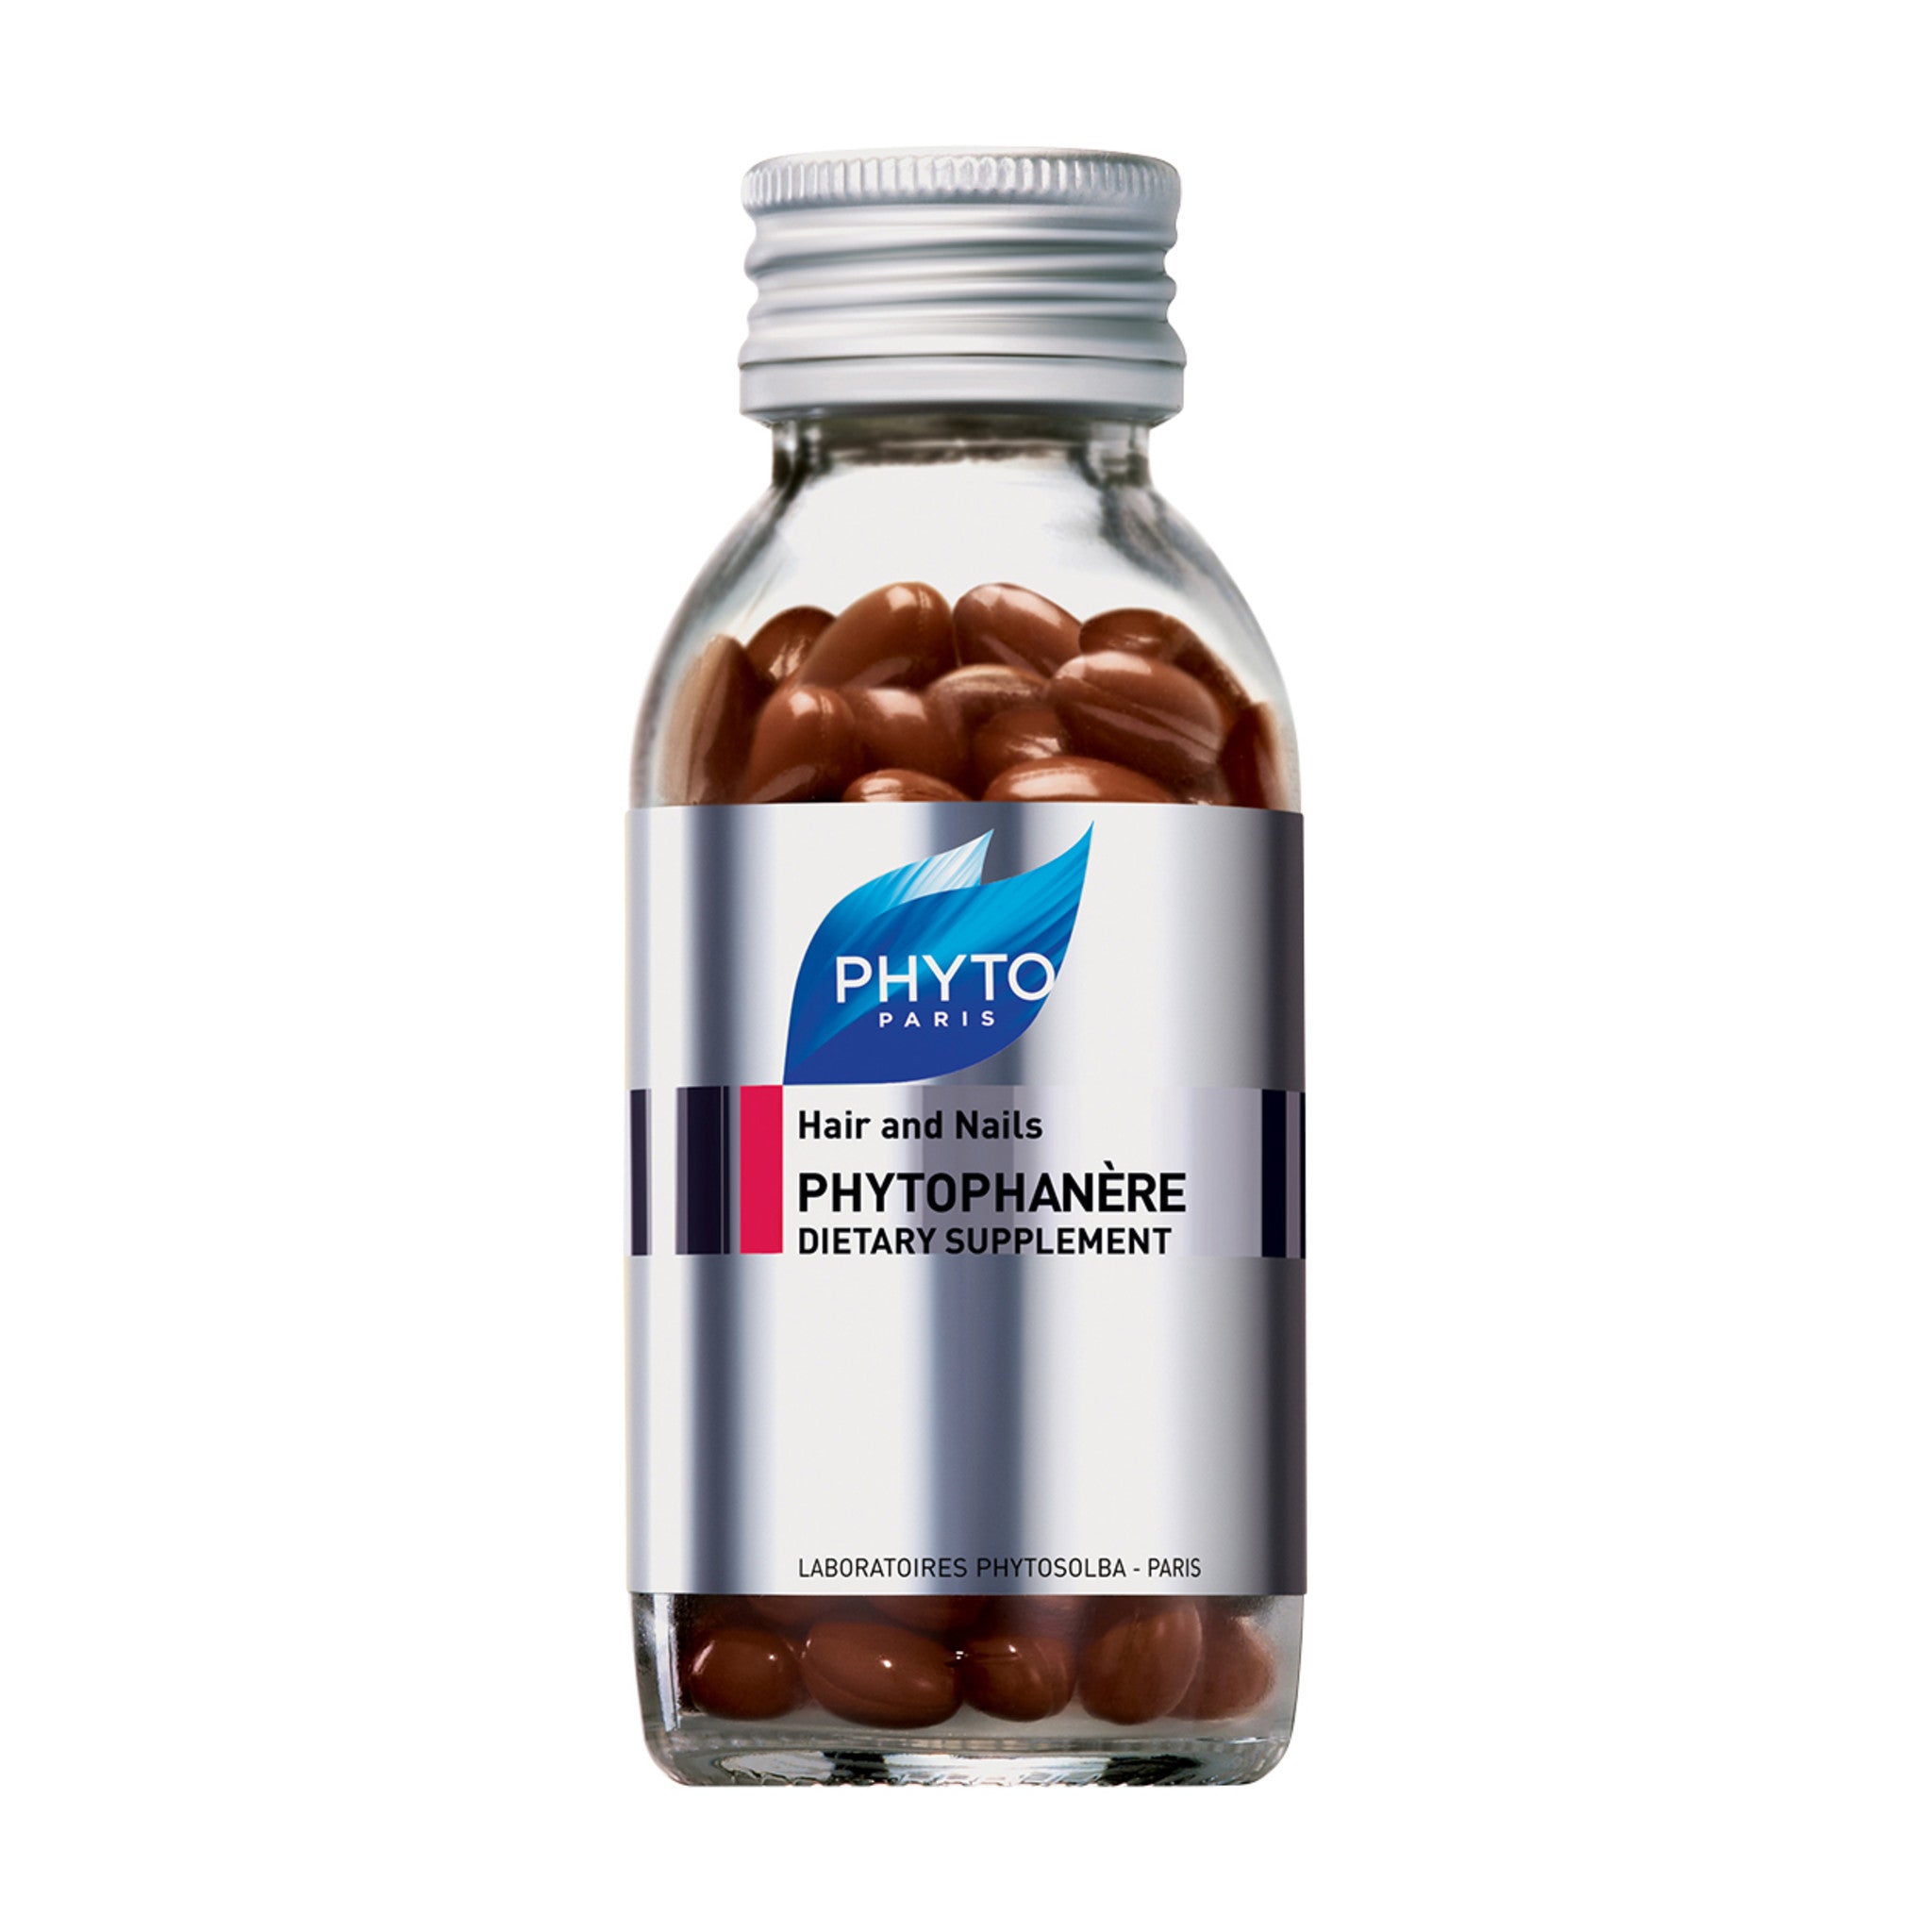 Phyto Phytophanere Hair And Nails Dietary Supplement main image.